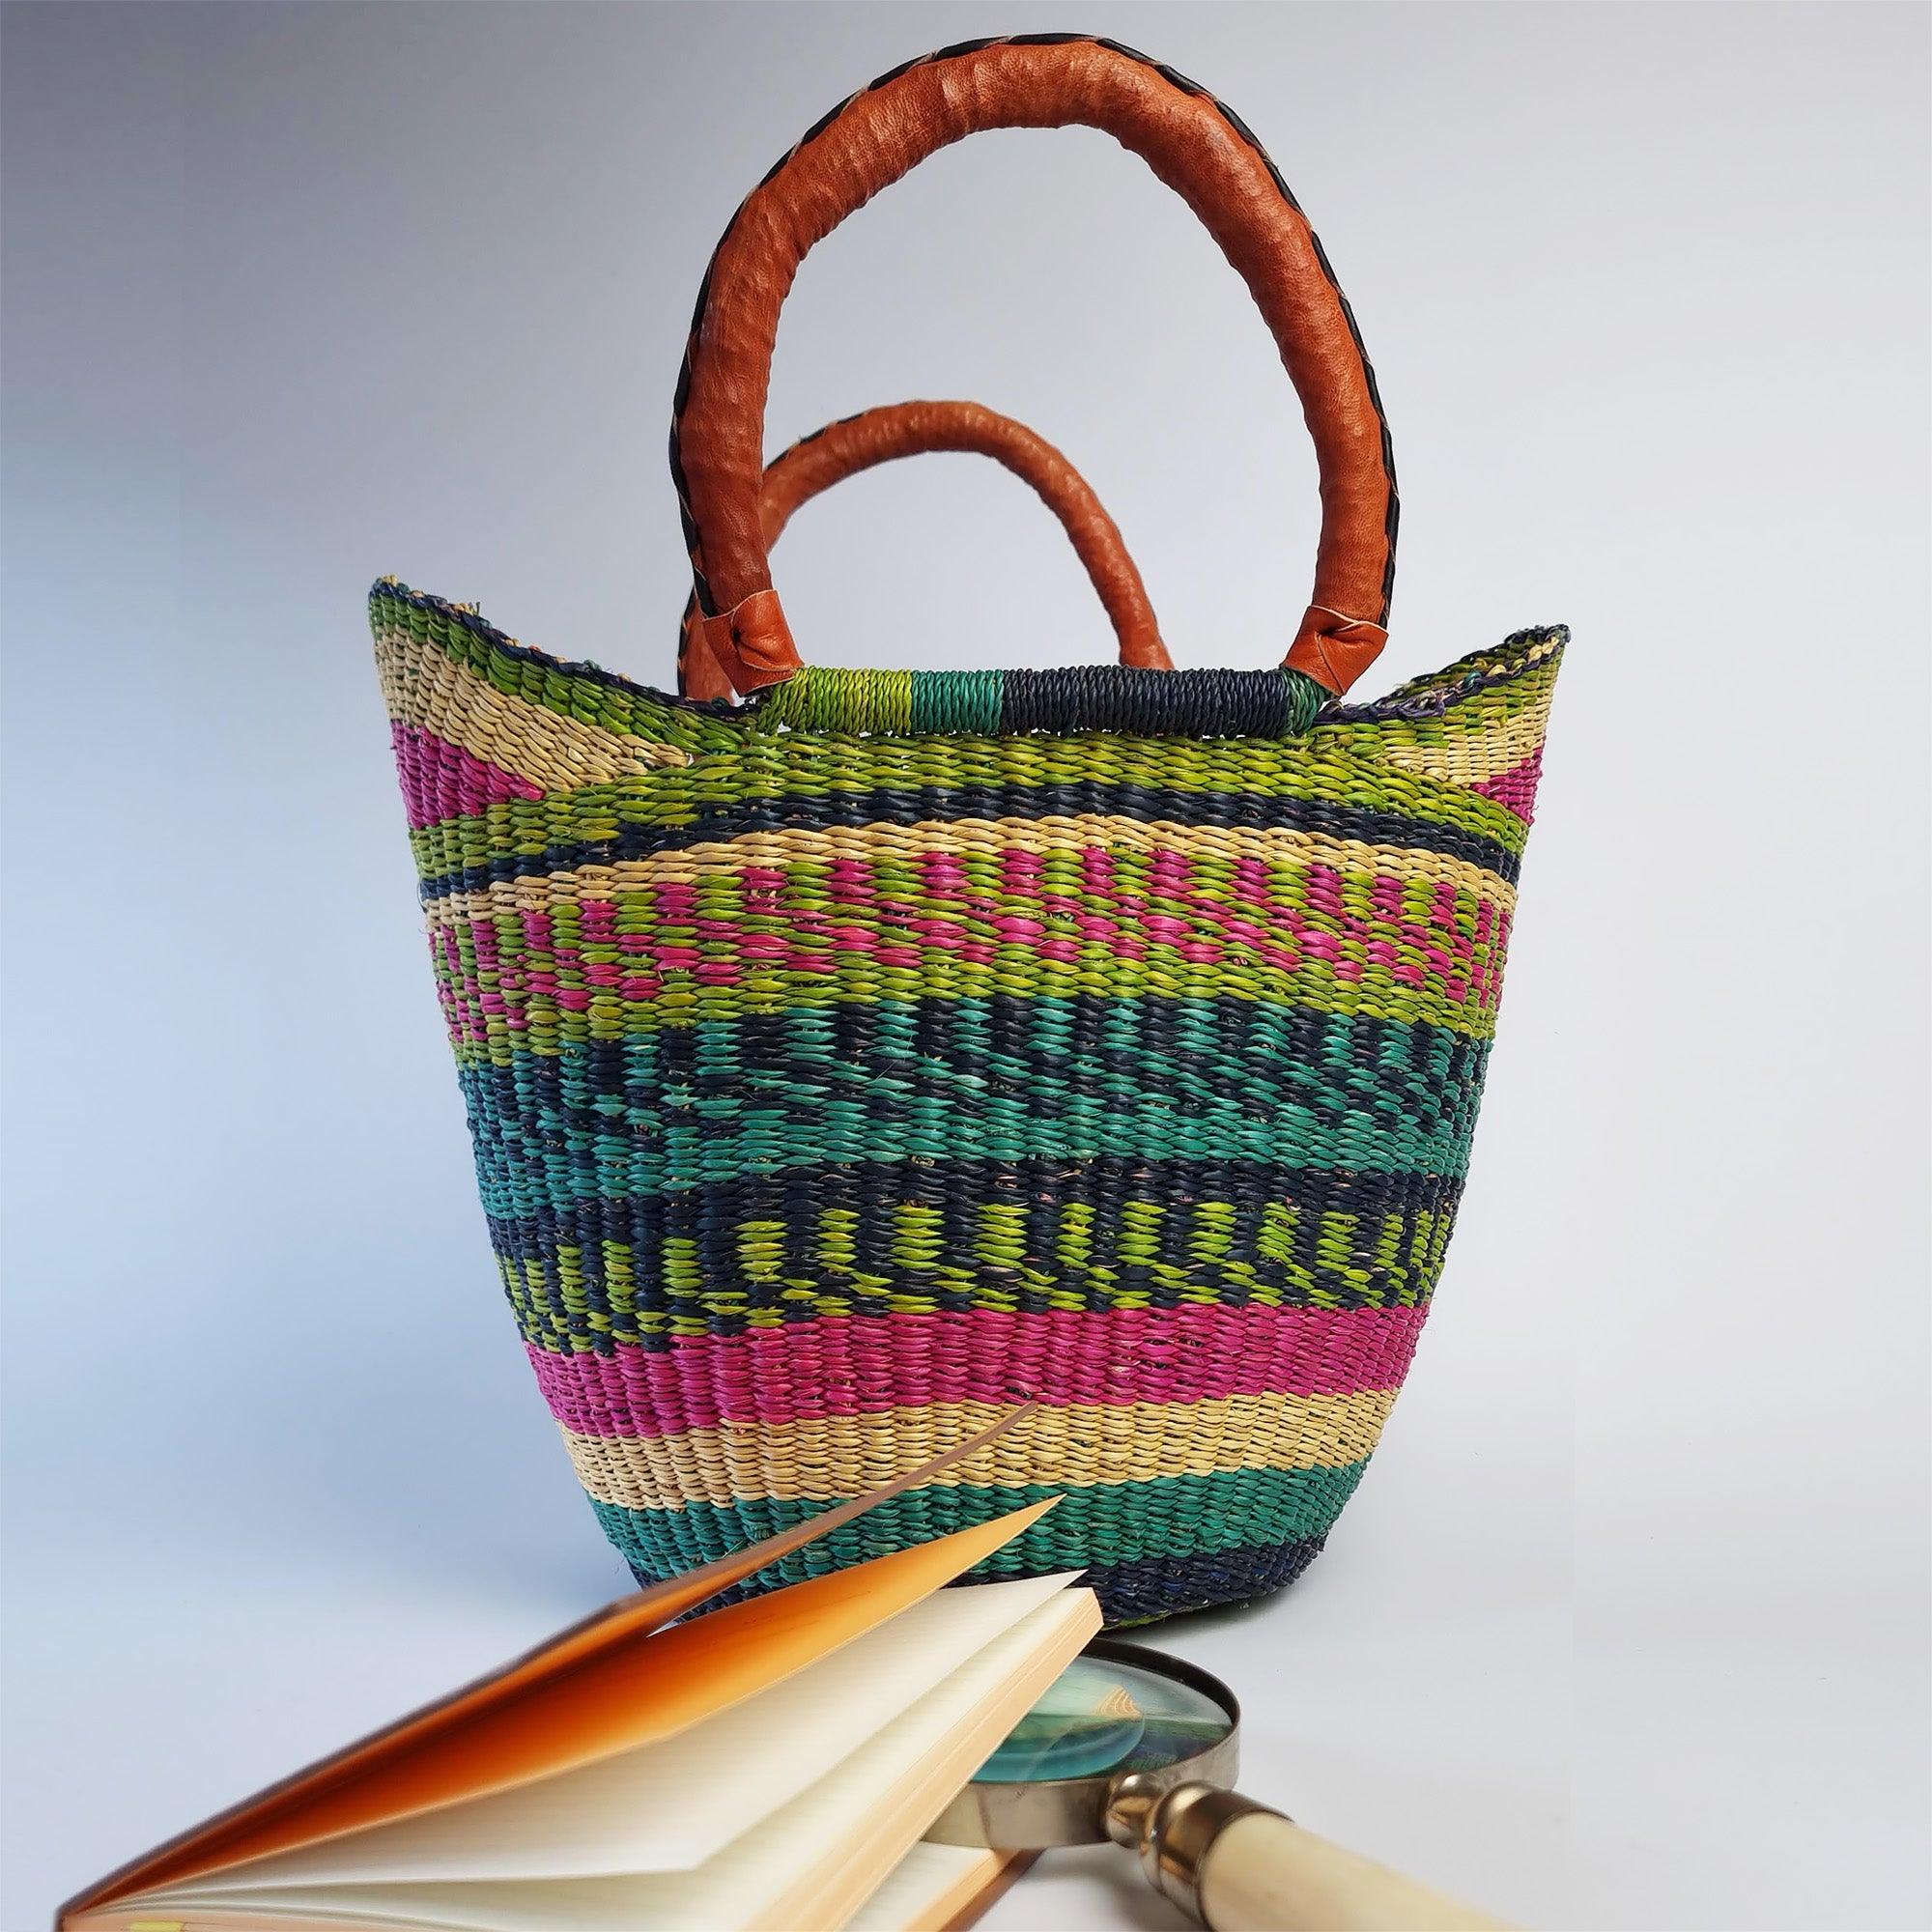 African Shopper Basket in the background with a notebook and magnifying glass in the foreground to show the scale.